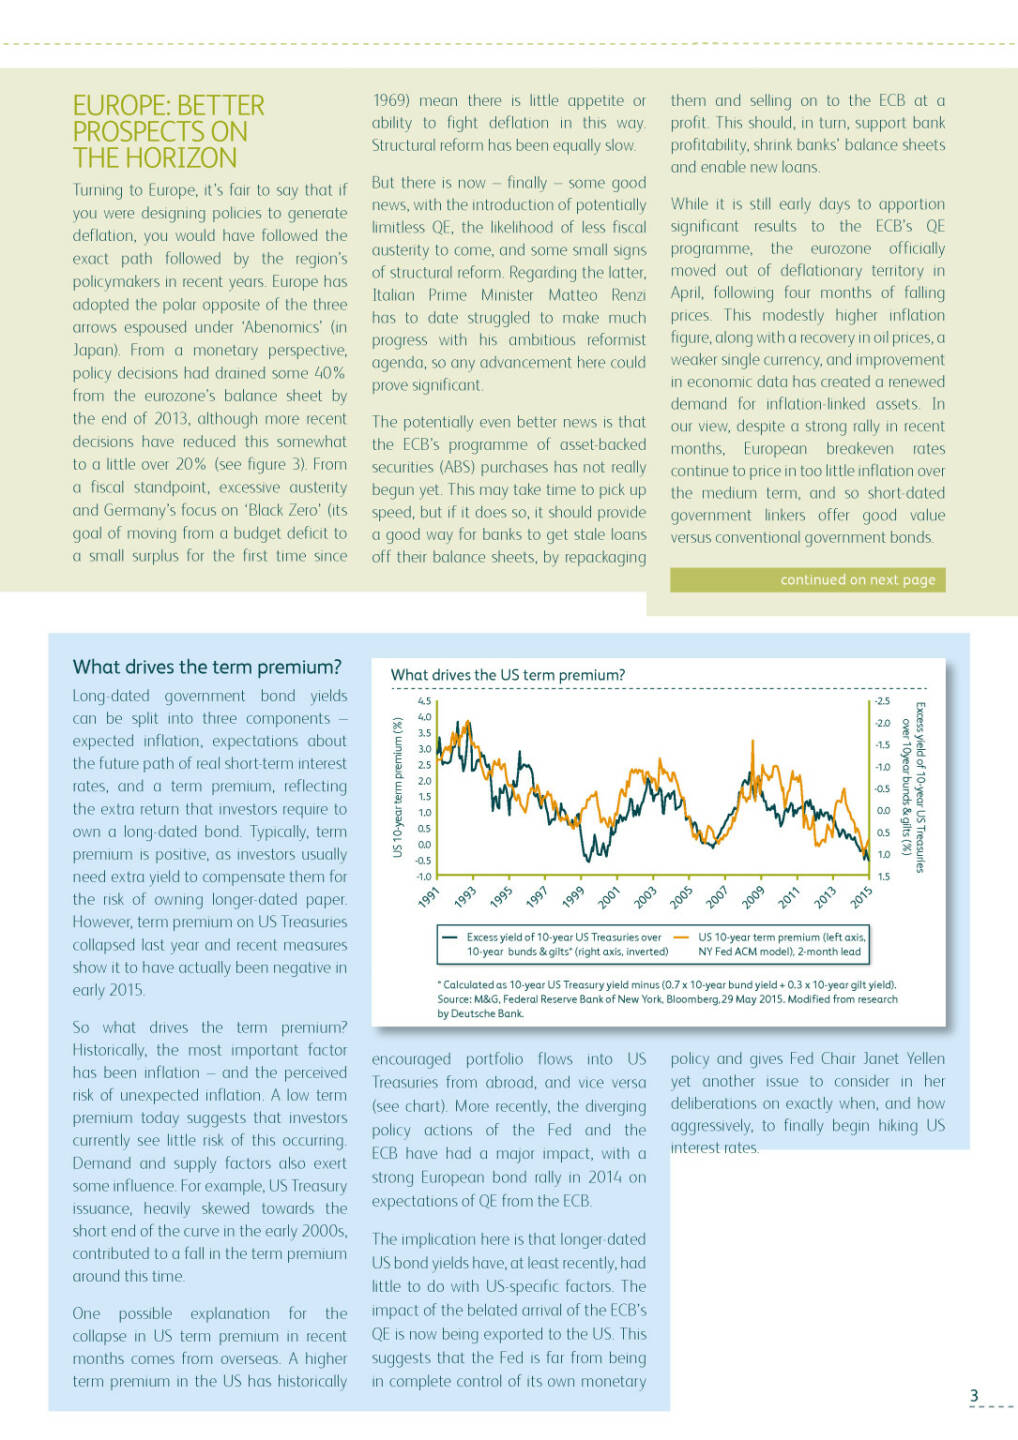 M&G Panoramic Outlook, Seite 3/5, komplettes Dokument unter http://boerse-social.com/static/uploads/file_194_mg_panoramic_outlook.pdf